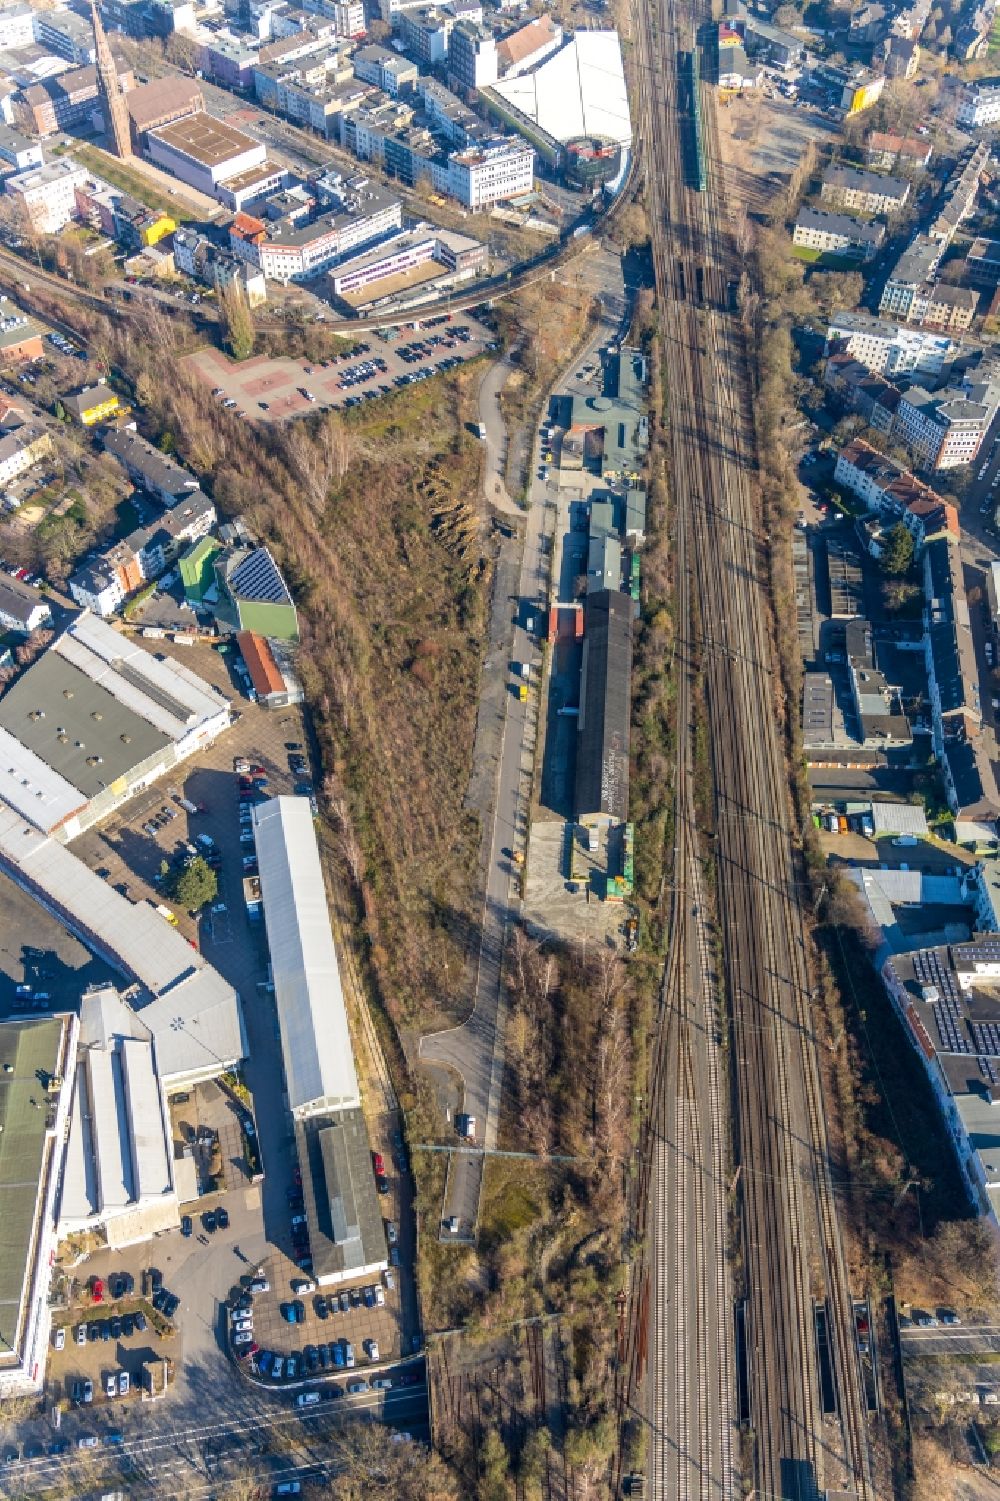 Aerial image Bochum - Industrial estate and company settlement overlooking the culture center Rotunde Bochum along the rail course on Konrad-Adenauer-Platz in the district Innenstadt in Bochum in the state North Rhine-Westphalia, Germany